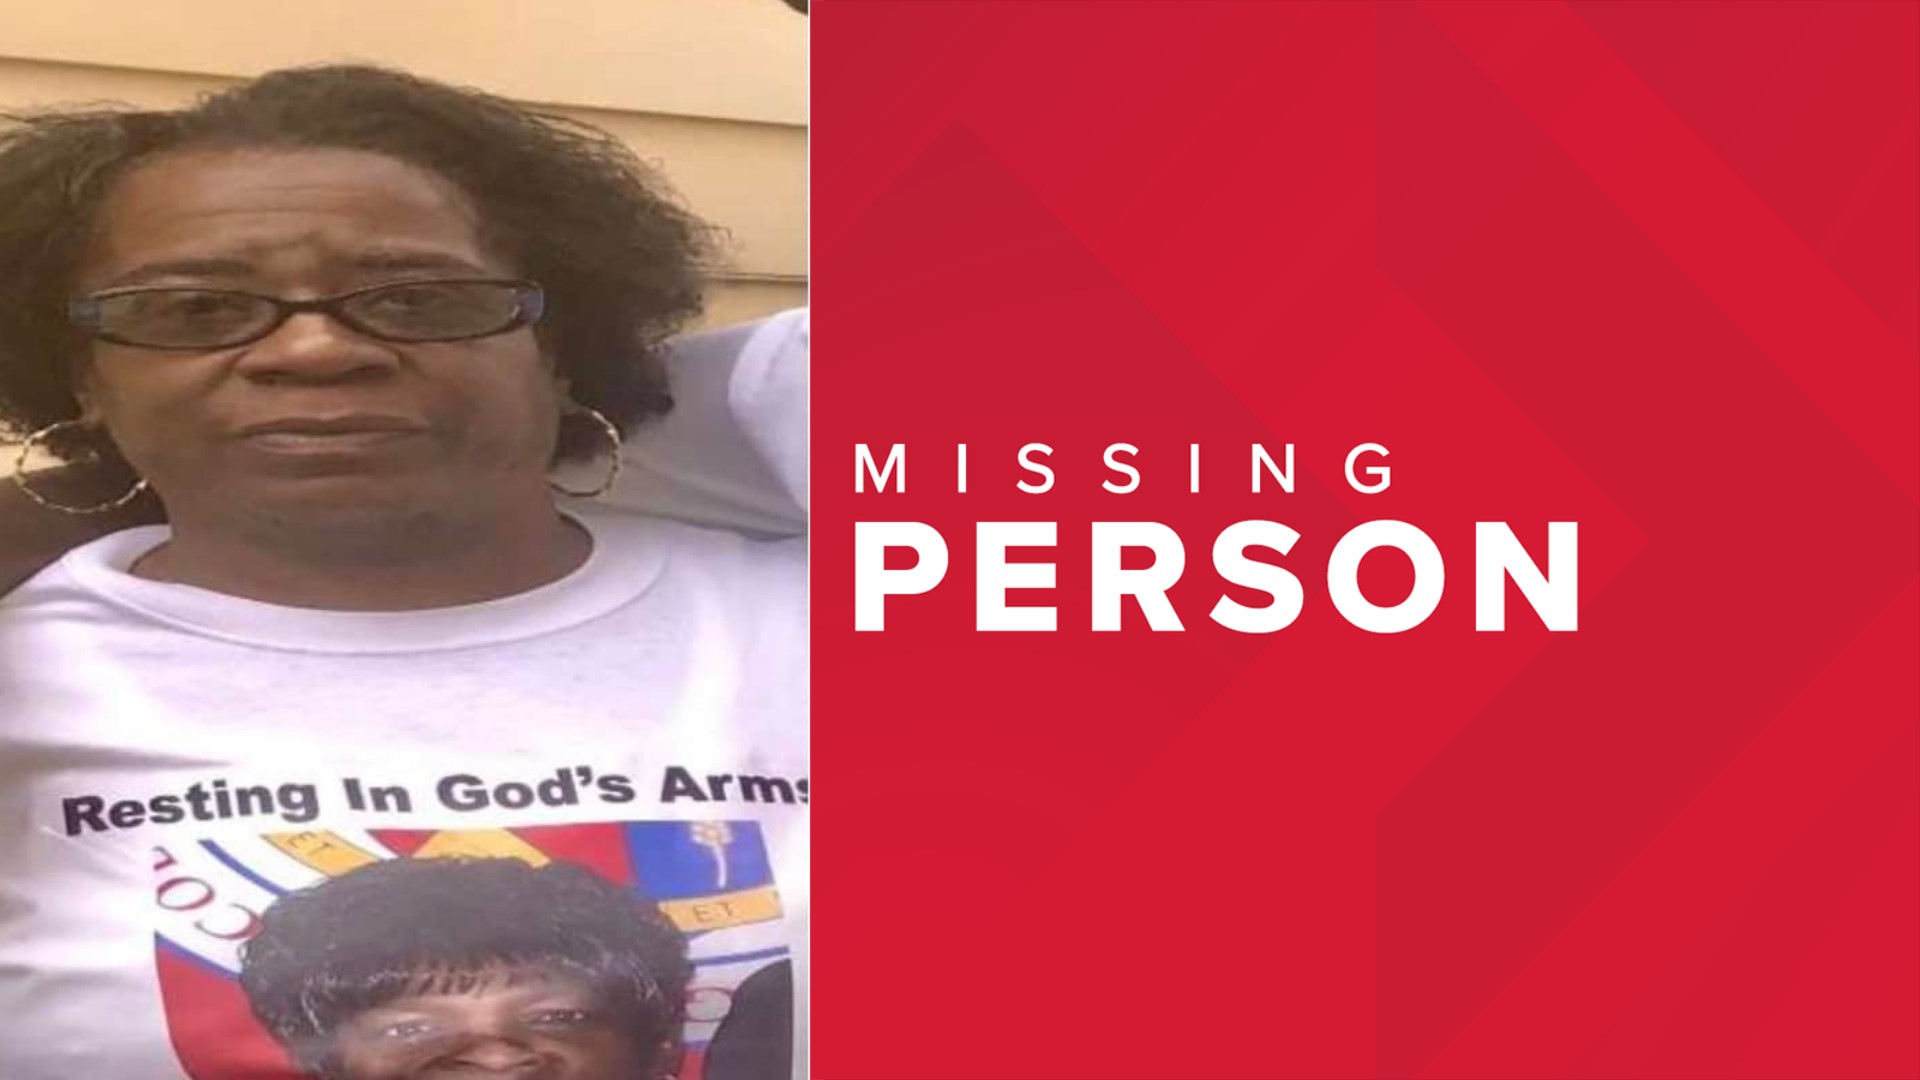 According to the police department, Barbara Dixon has not been seen or heard from after she left several days ago.